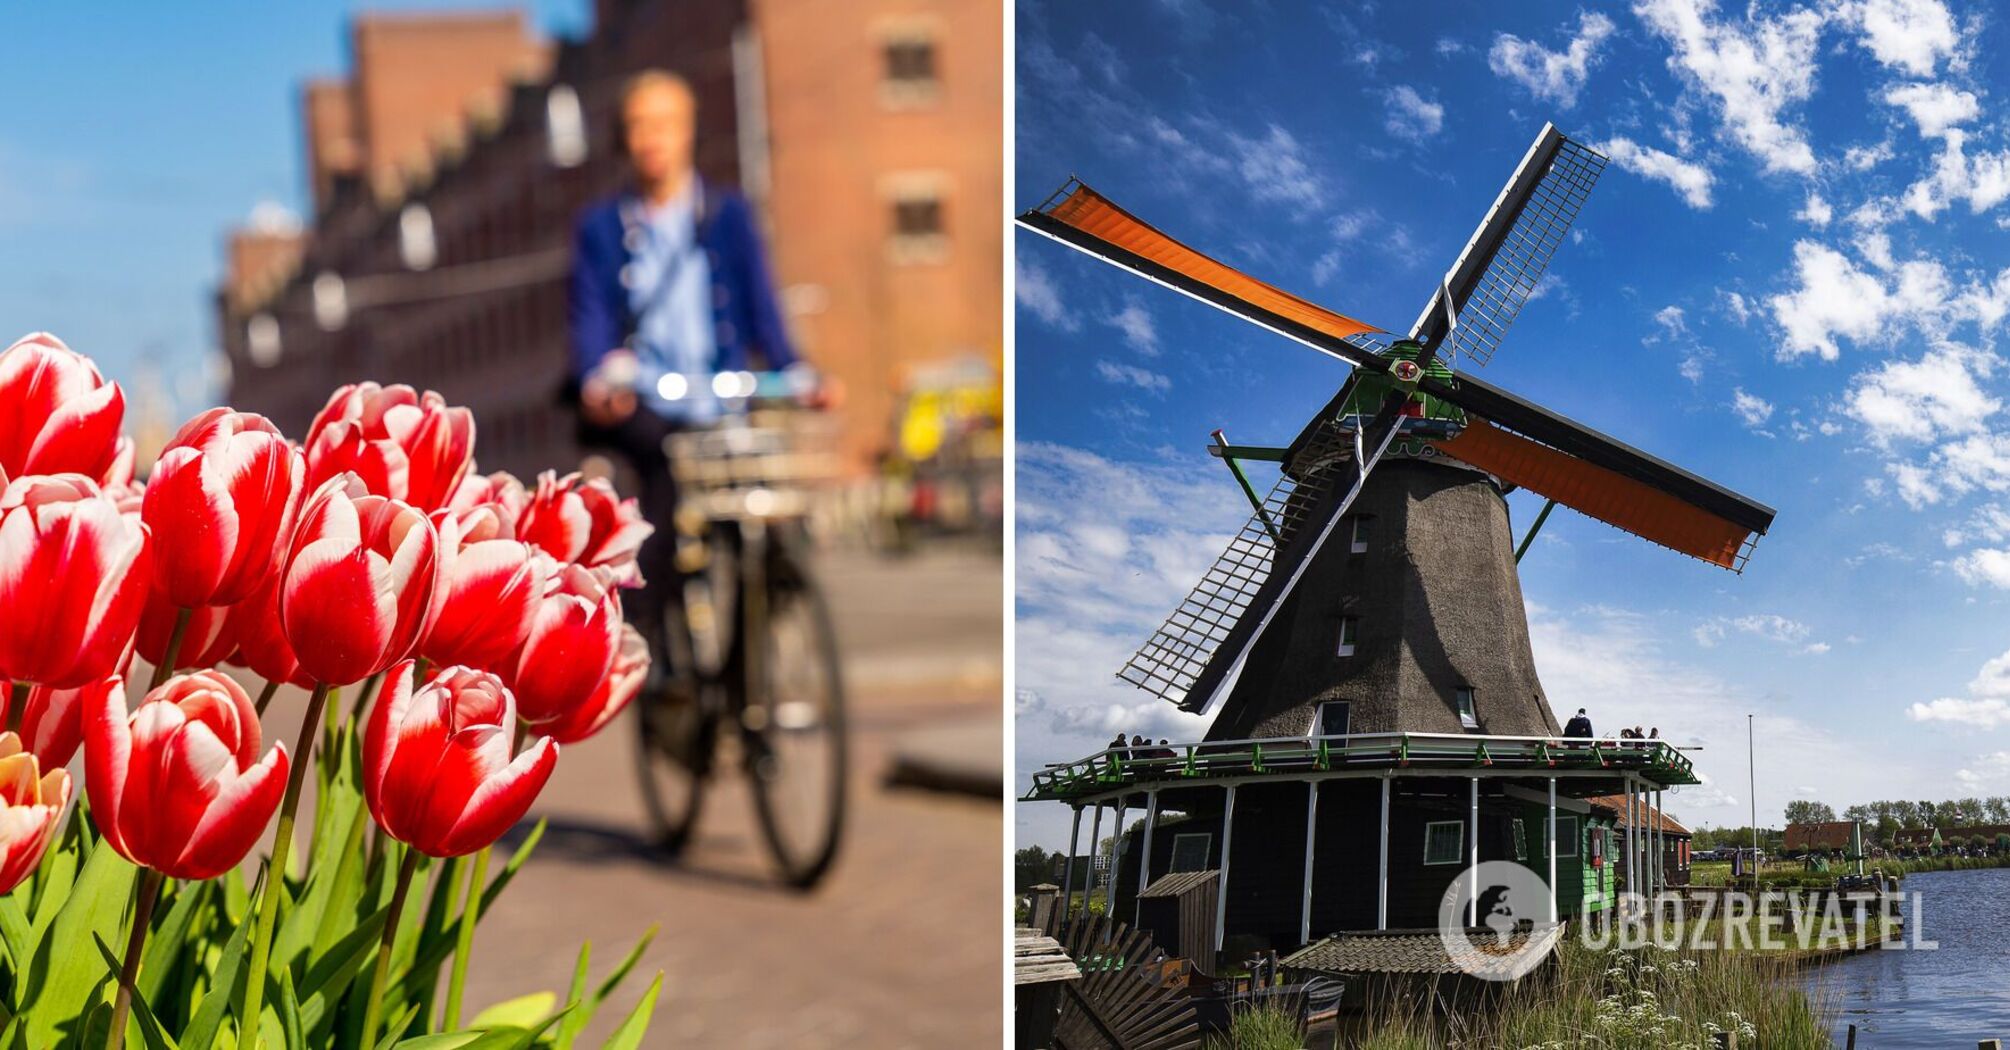 From Keukenhof Gardens to the Van Gogh Museum: planning a tour of the Netherlands